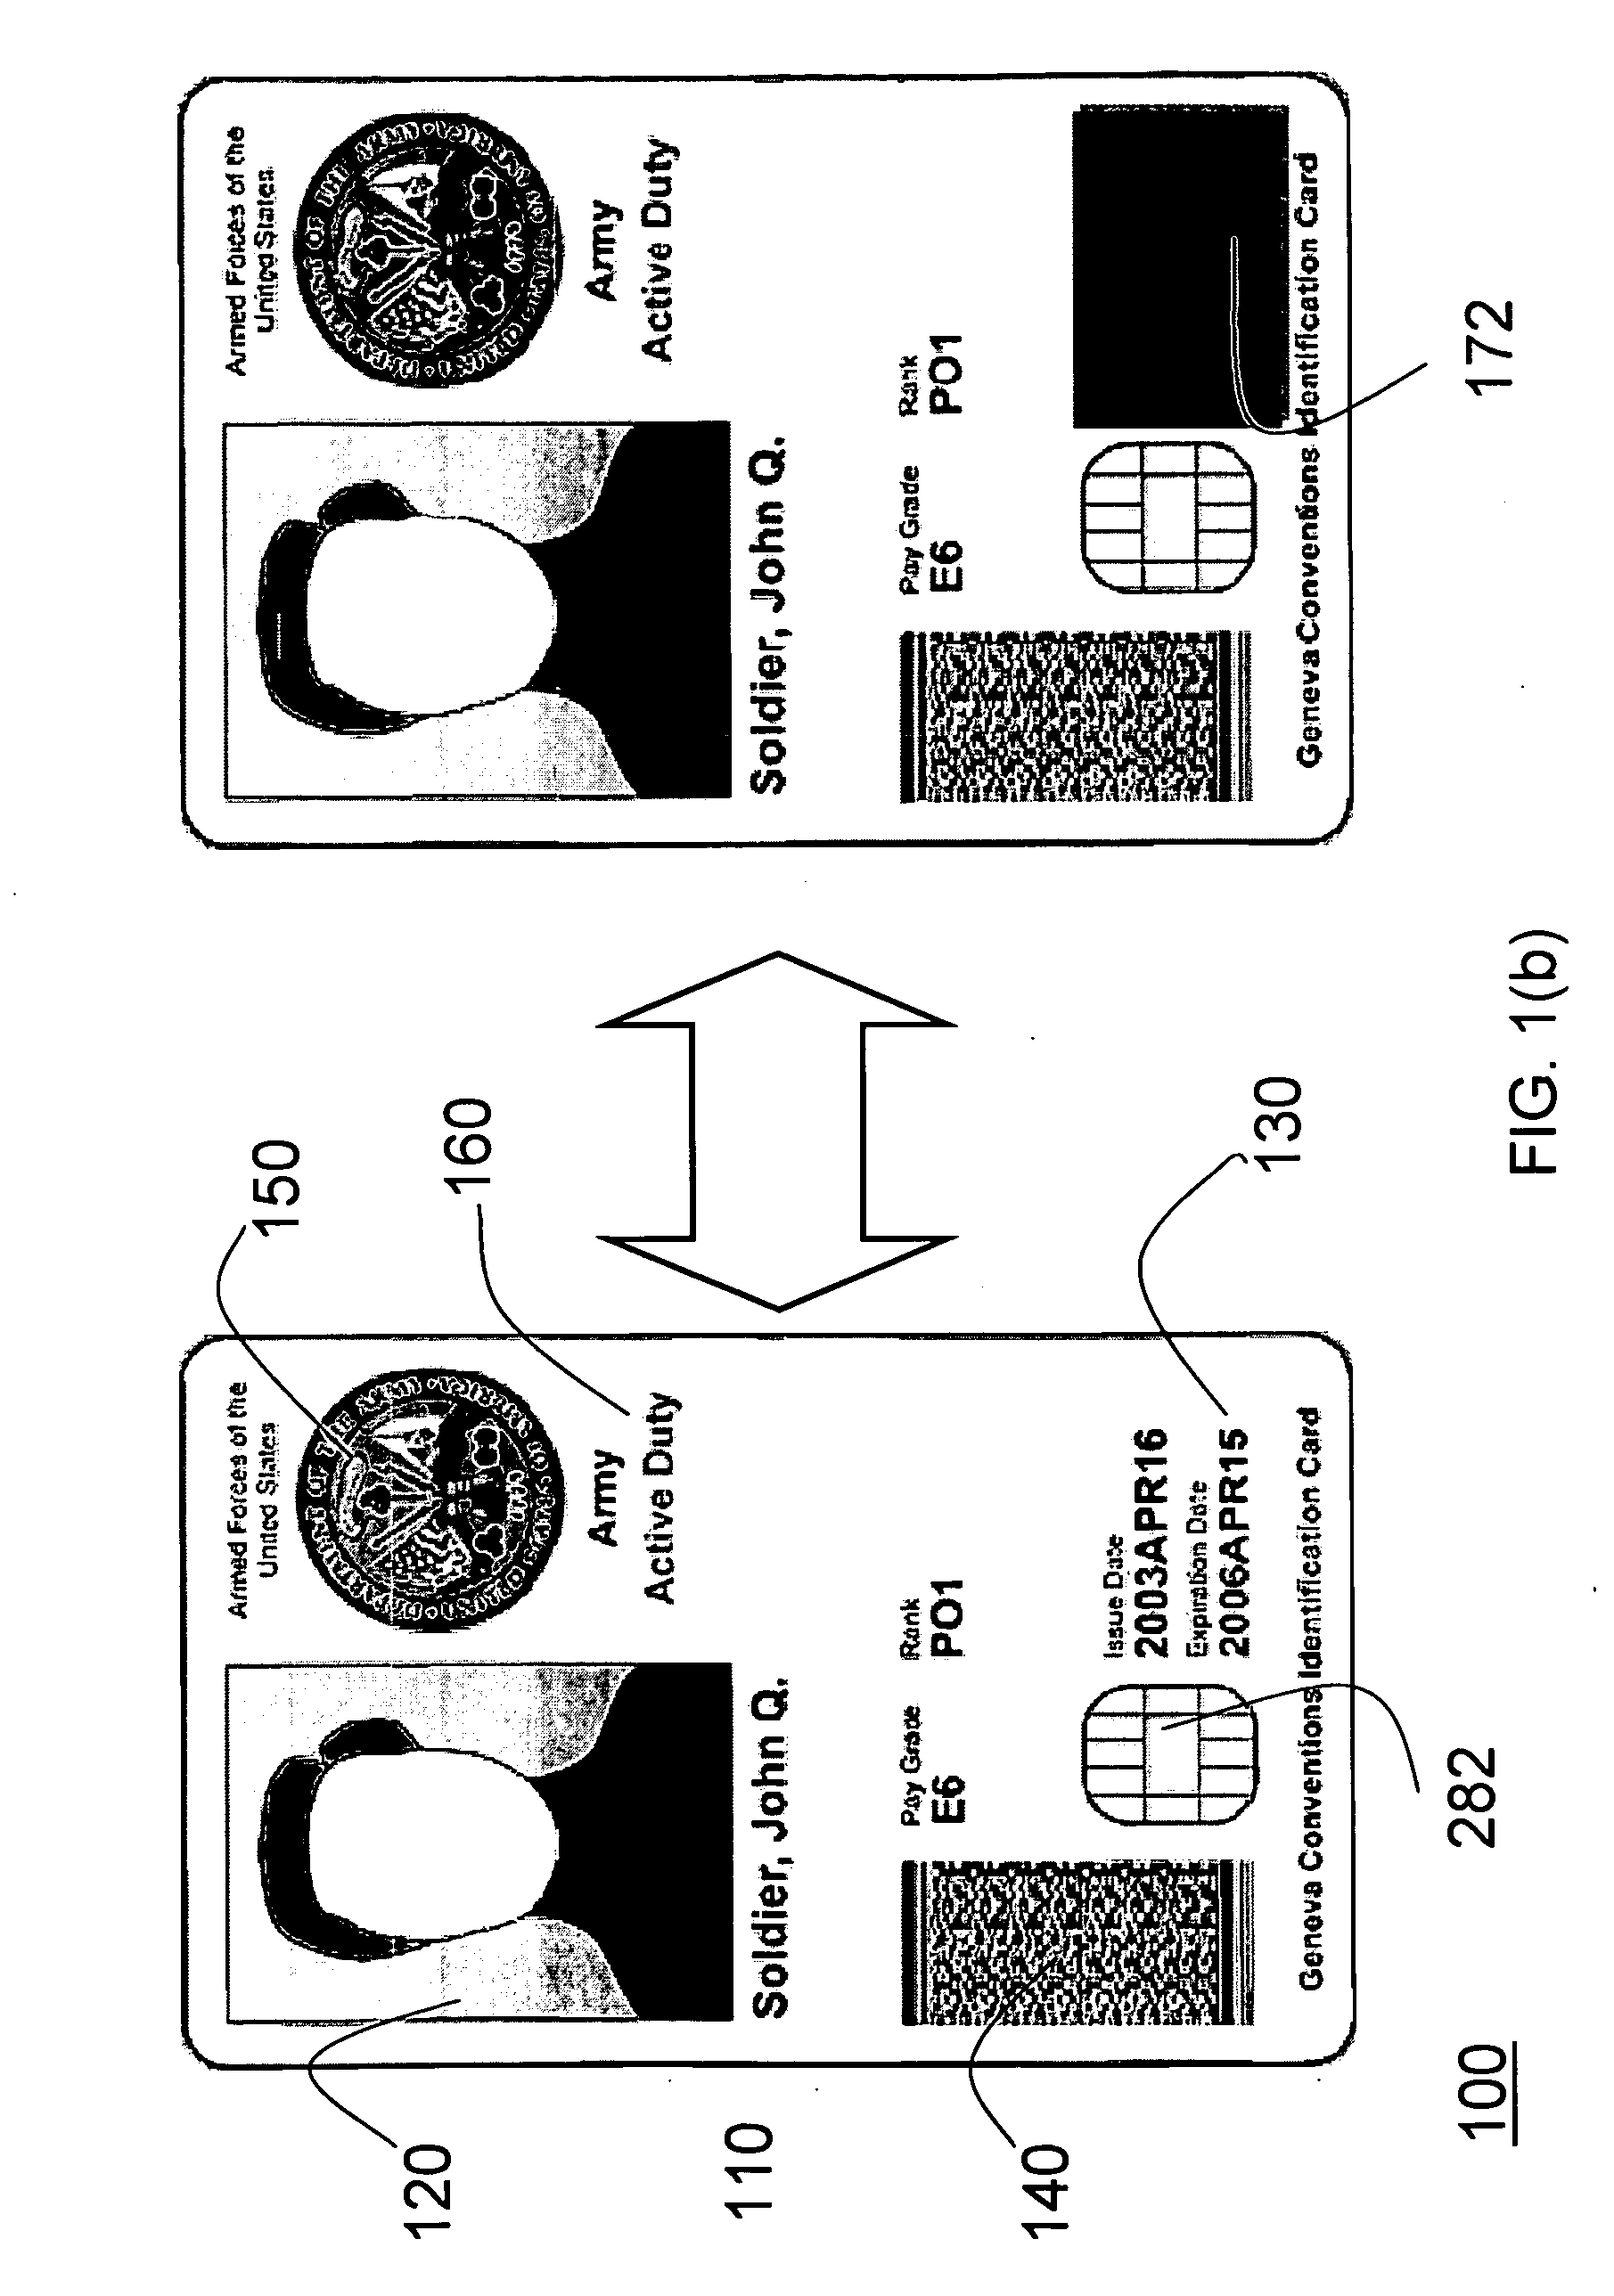 System and method for self-authenticating token